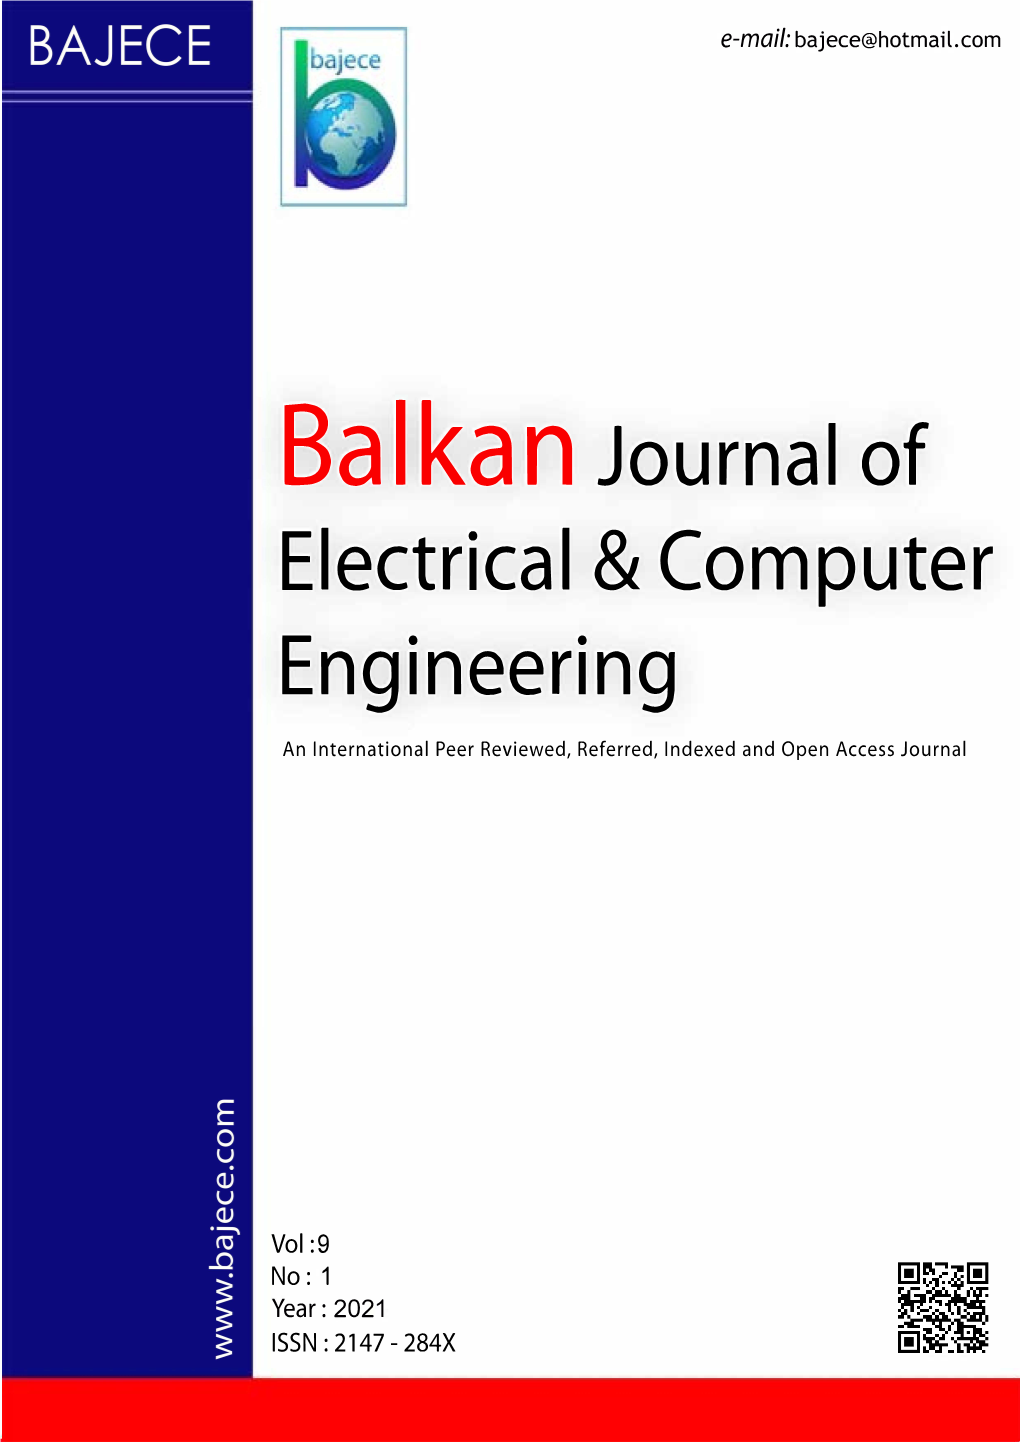 Ba I Kan Journal of Electrical & Computer Engineering